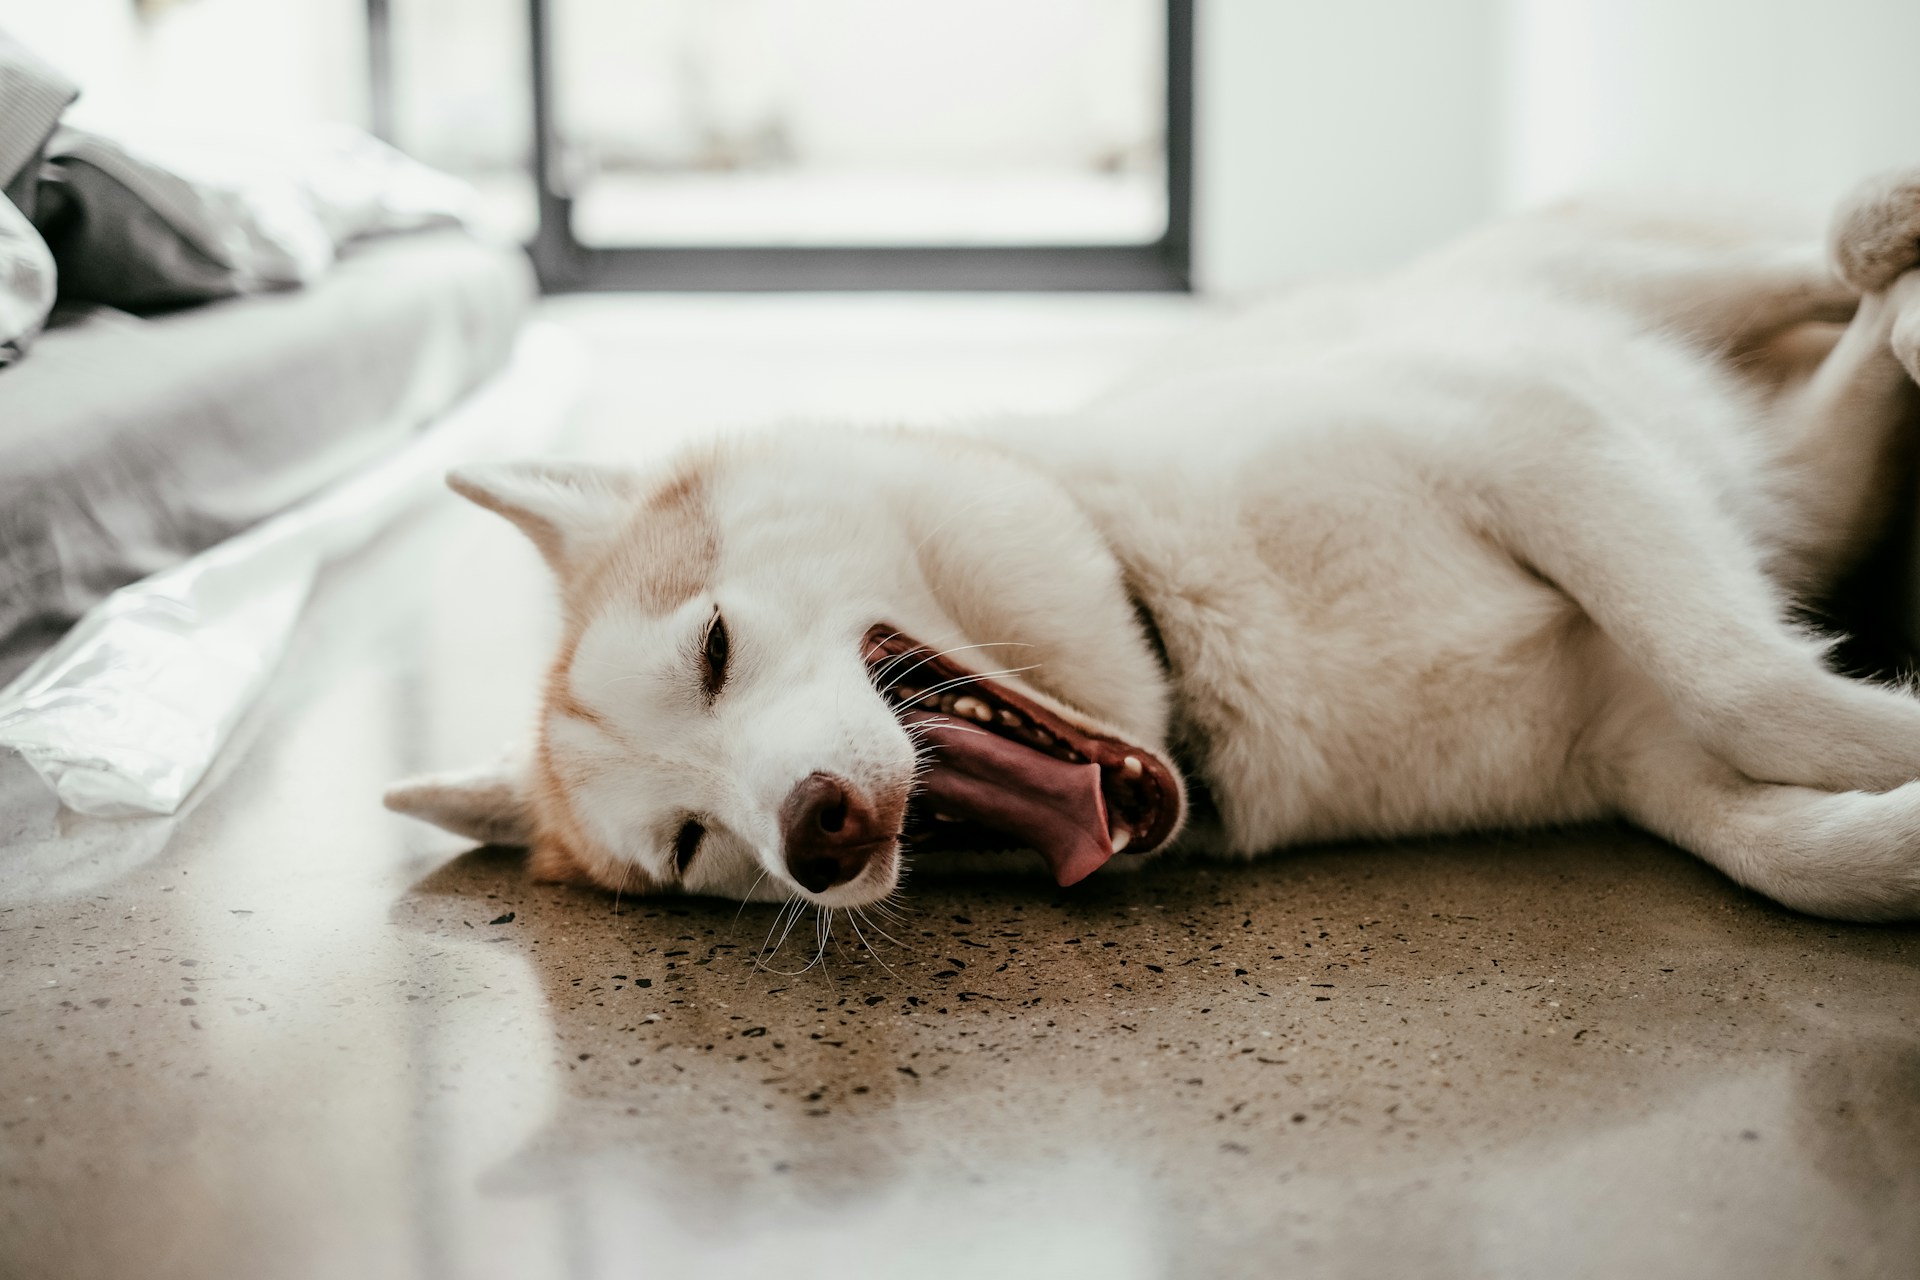 A tired dog yawning while lying on the floor